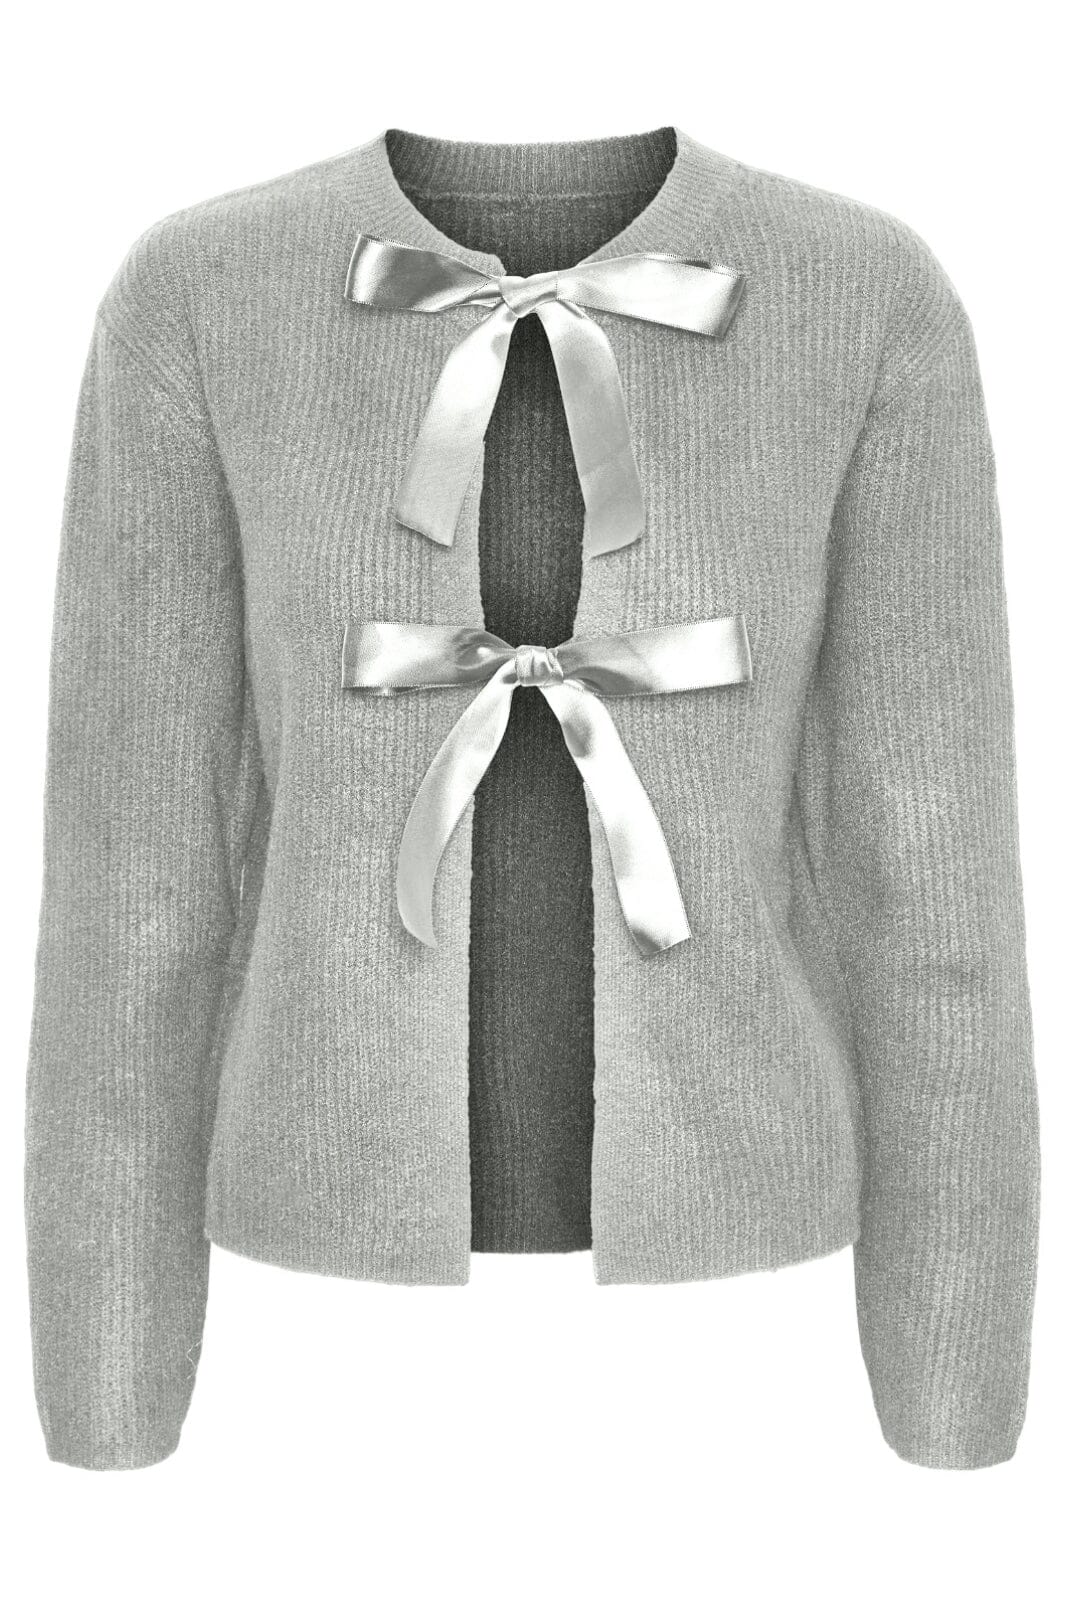 Pieces - Pcrilly Ls Reversible Bow Knit - 4674407 Light Grey Melange Dtm Woven Bow Cardigans 